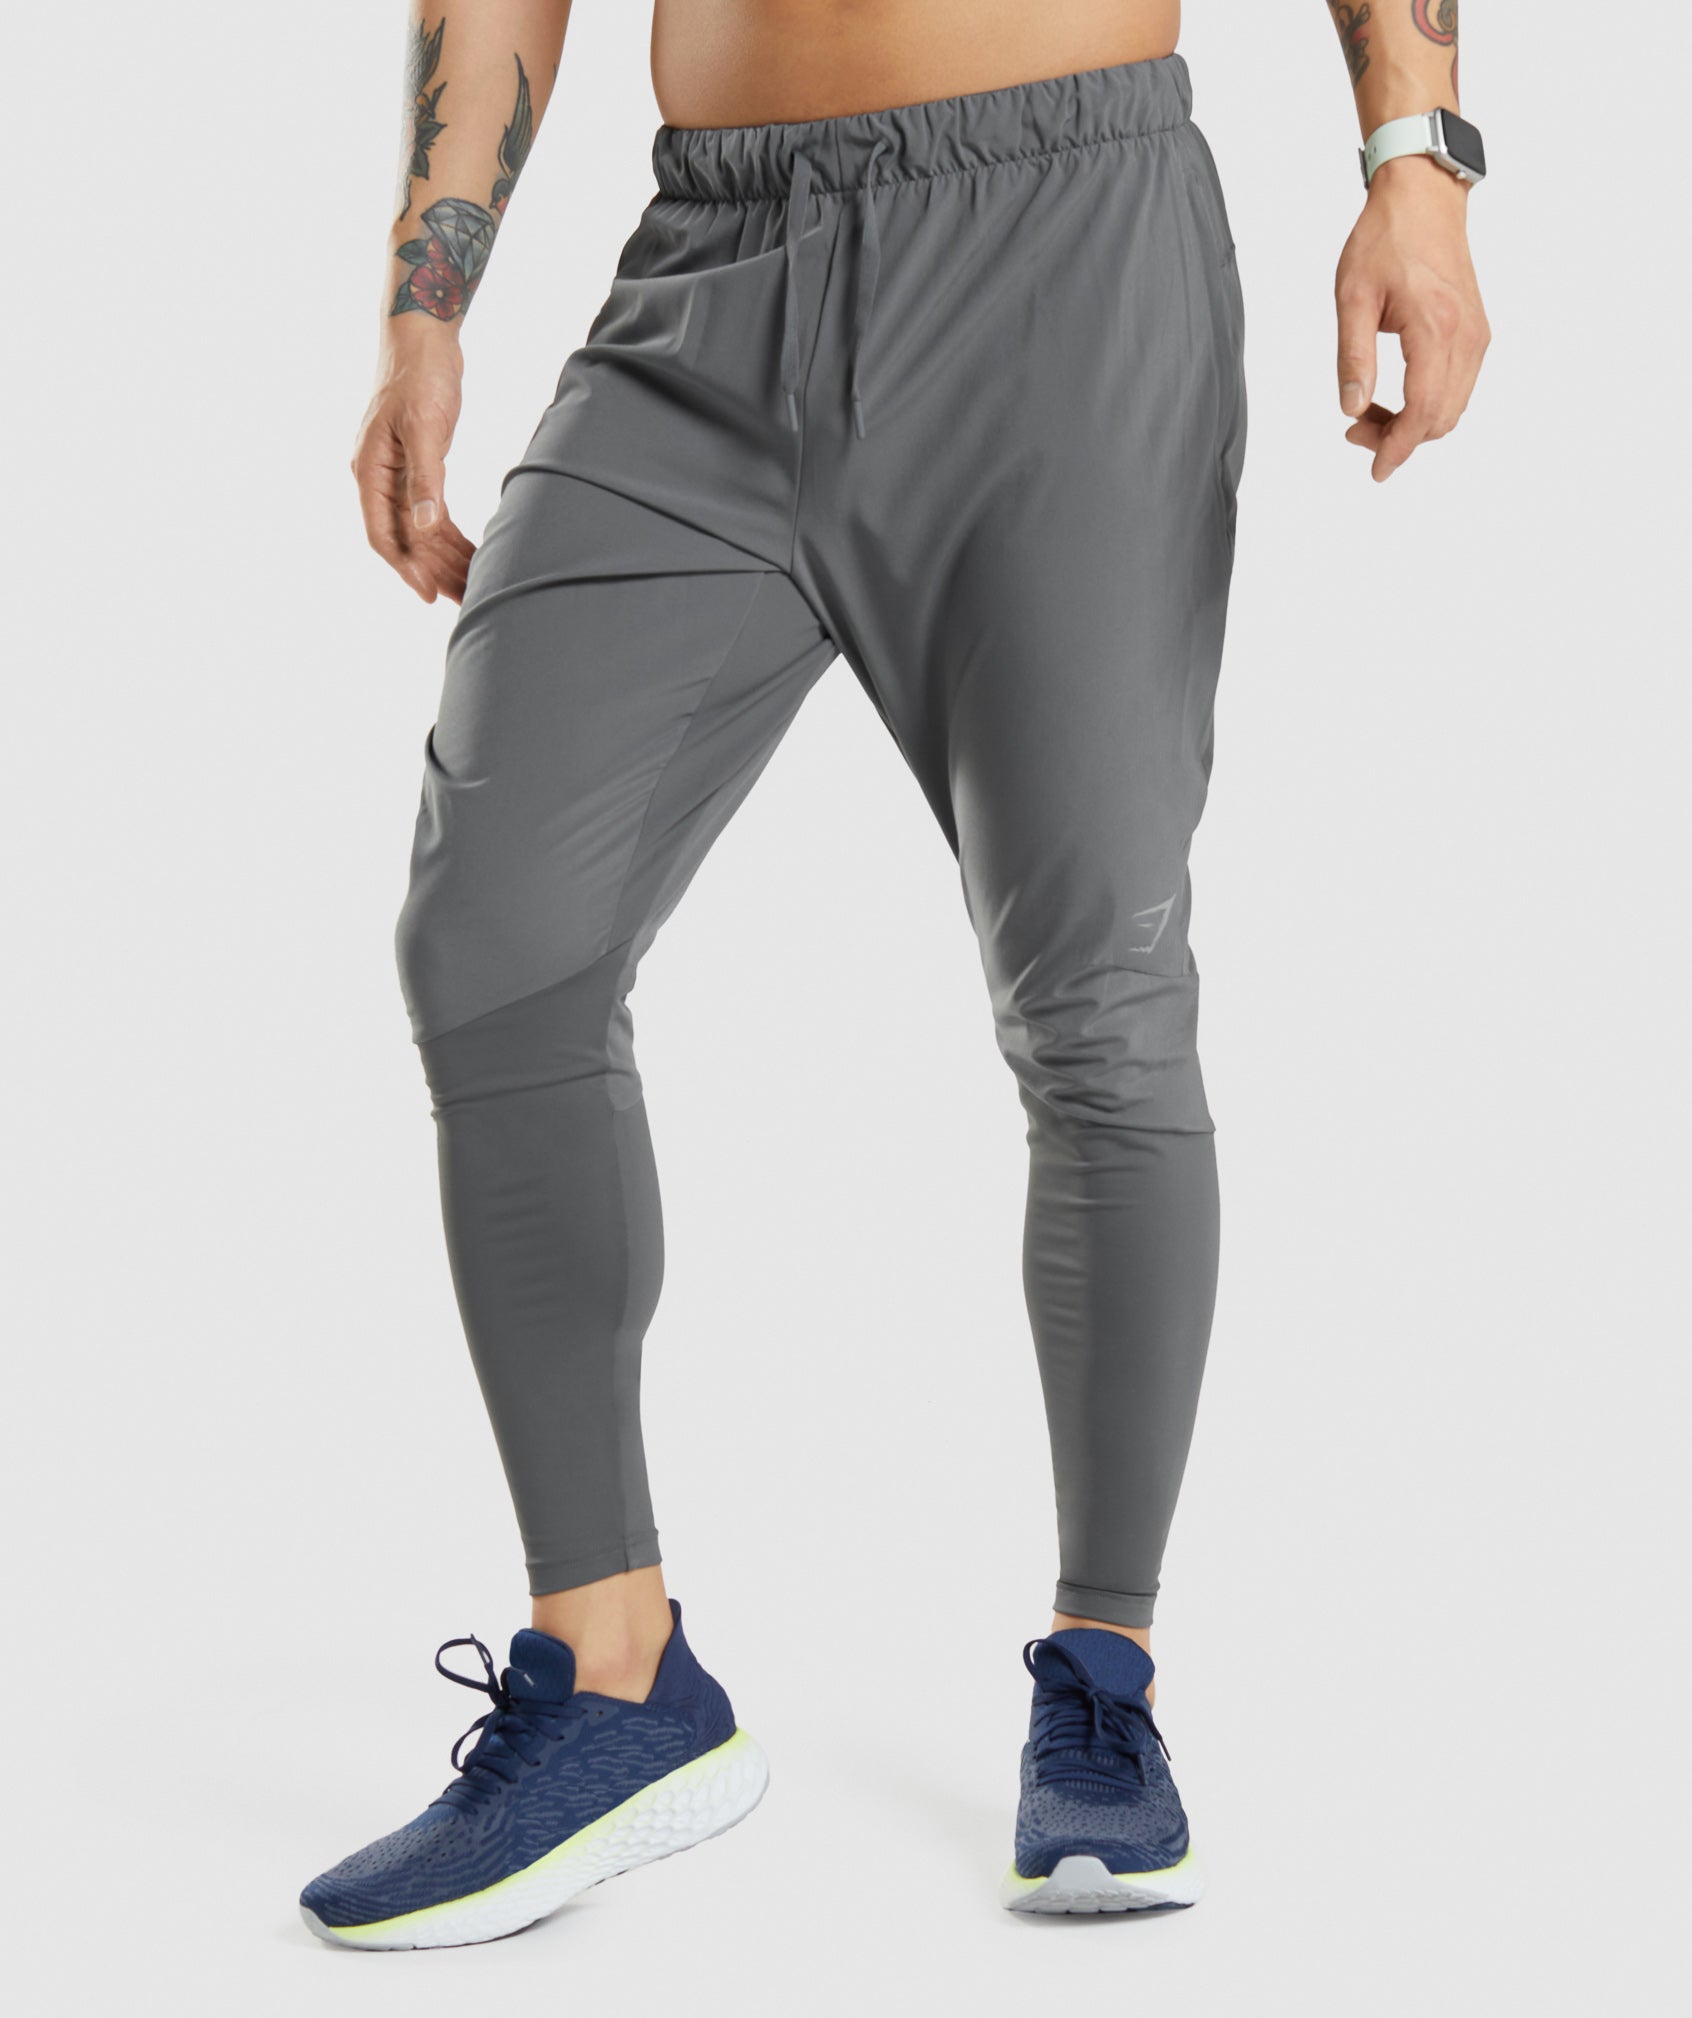 Speed Joggers in Charcoal - view 1